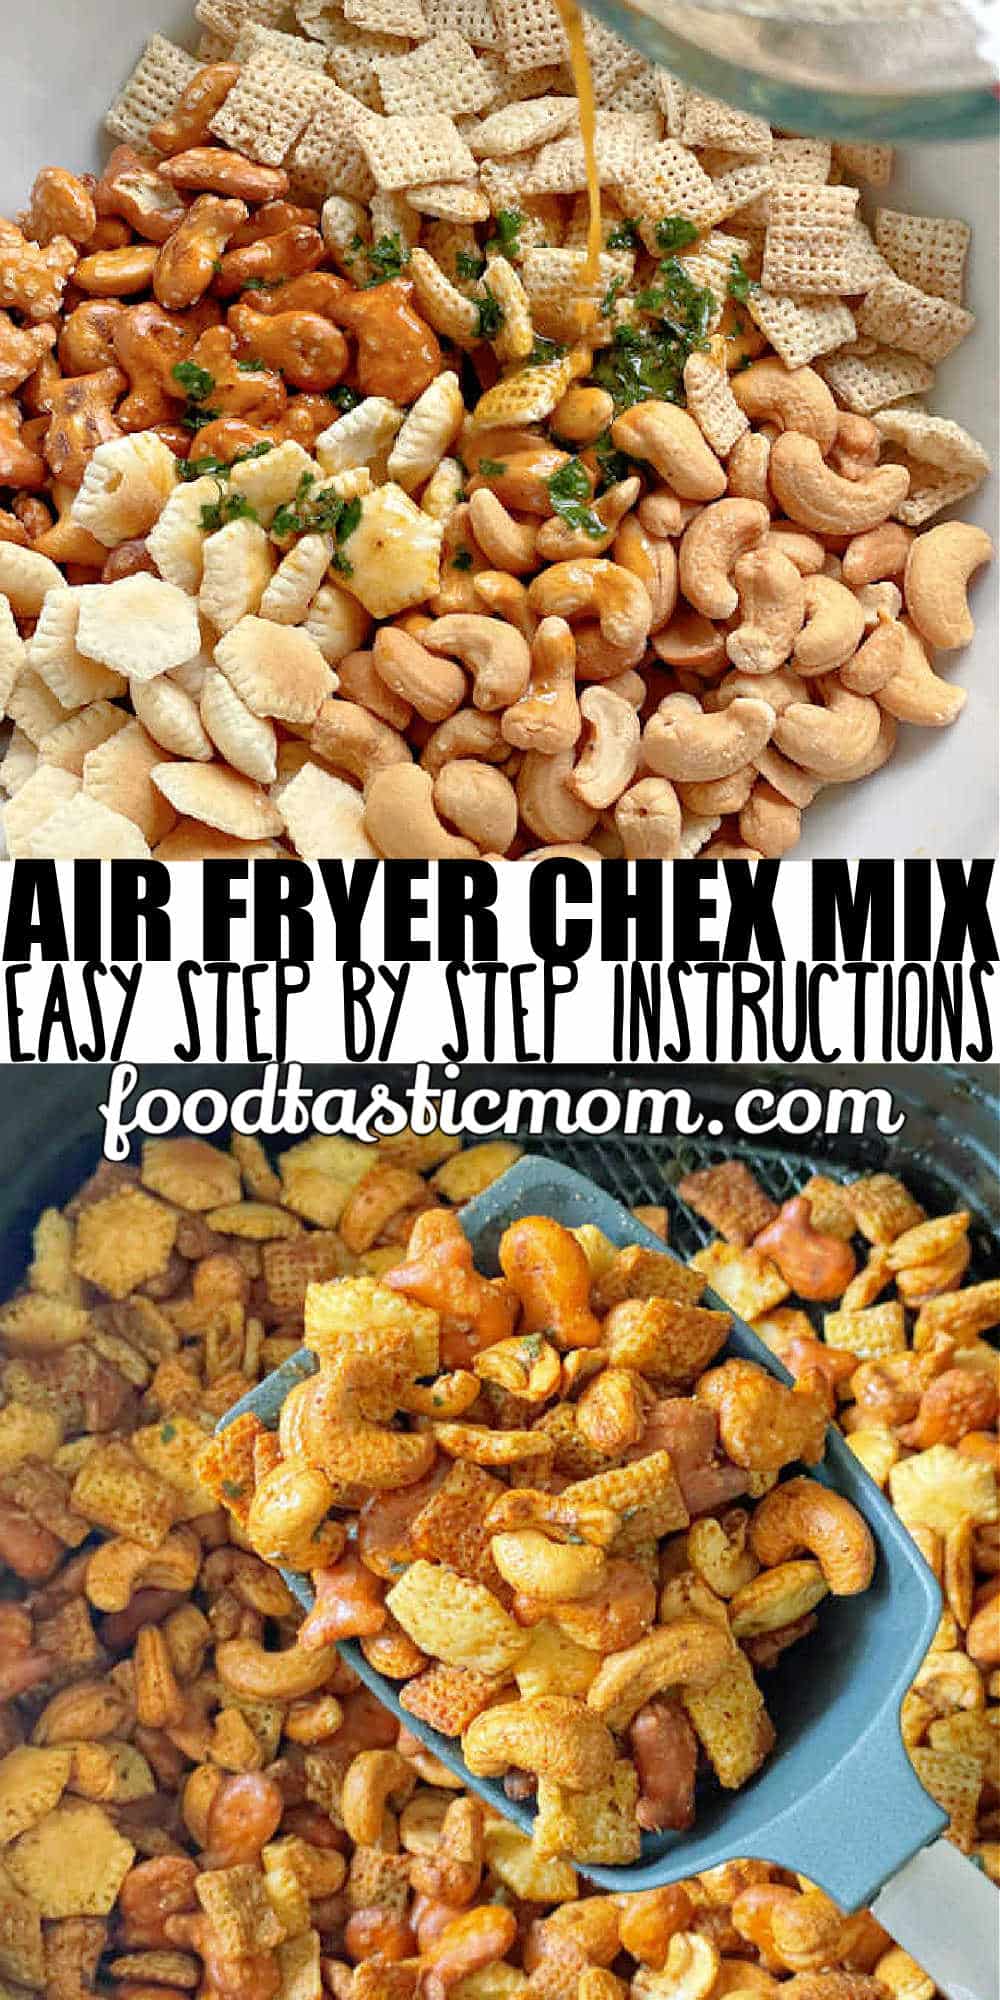 My Air Fryer Chex Mix combines rice Chex, Goldfish pretzels, oyster crackers and cashews with an Old Bay seasoning mix and buttery sauce. It's perfect for summer snacking! An air fryer is superior to your oven in making this popular snack mix.  via @foodtasticmom